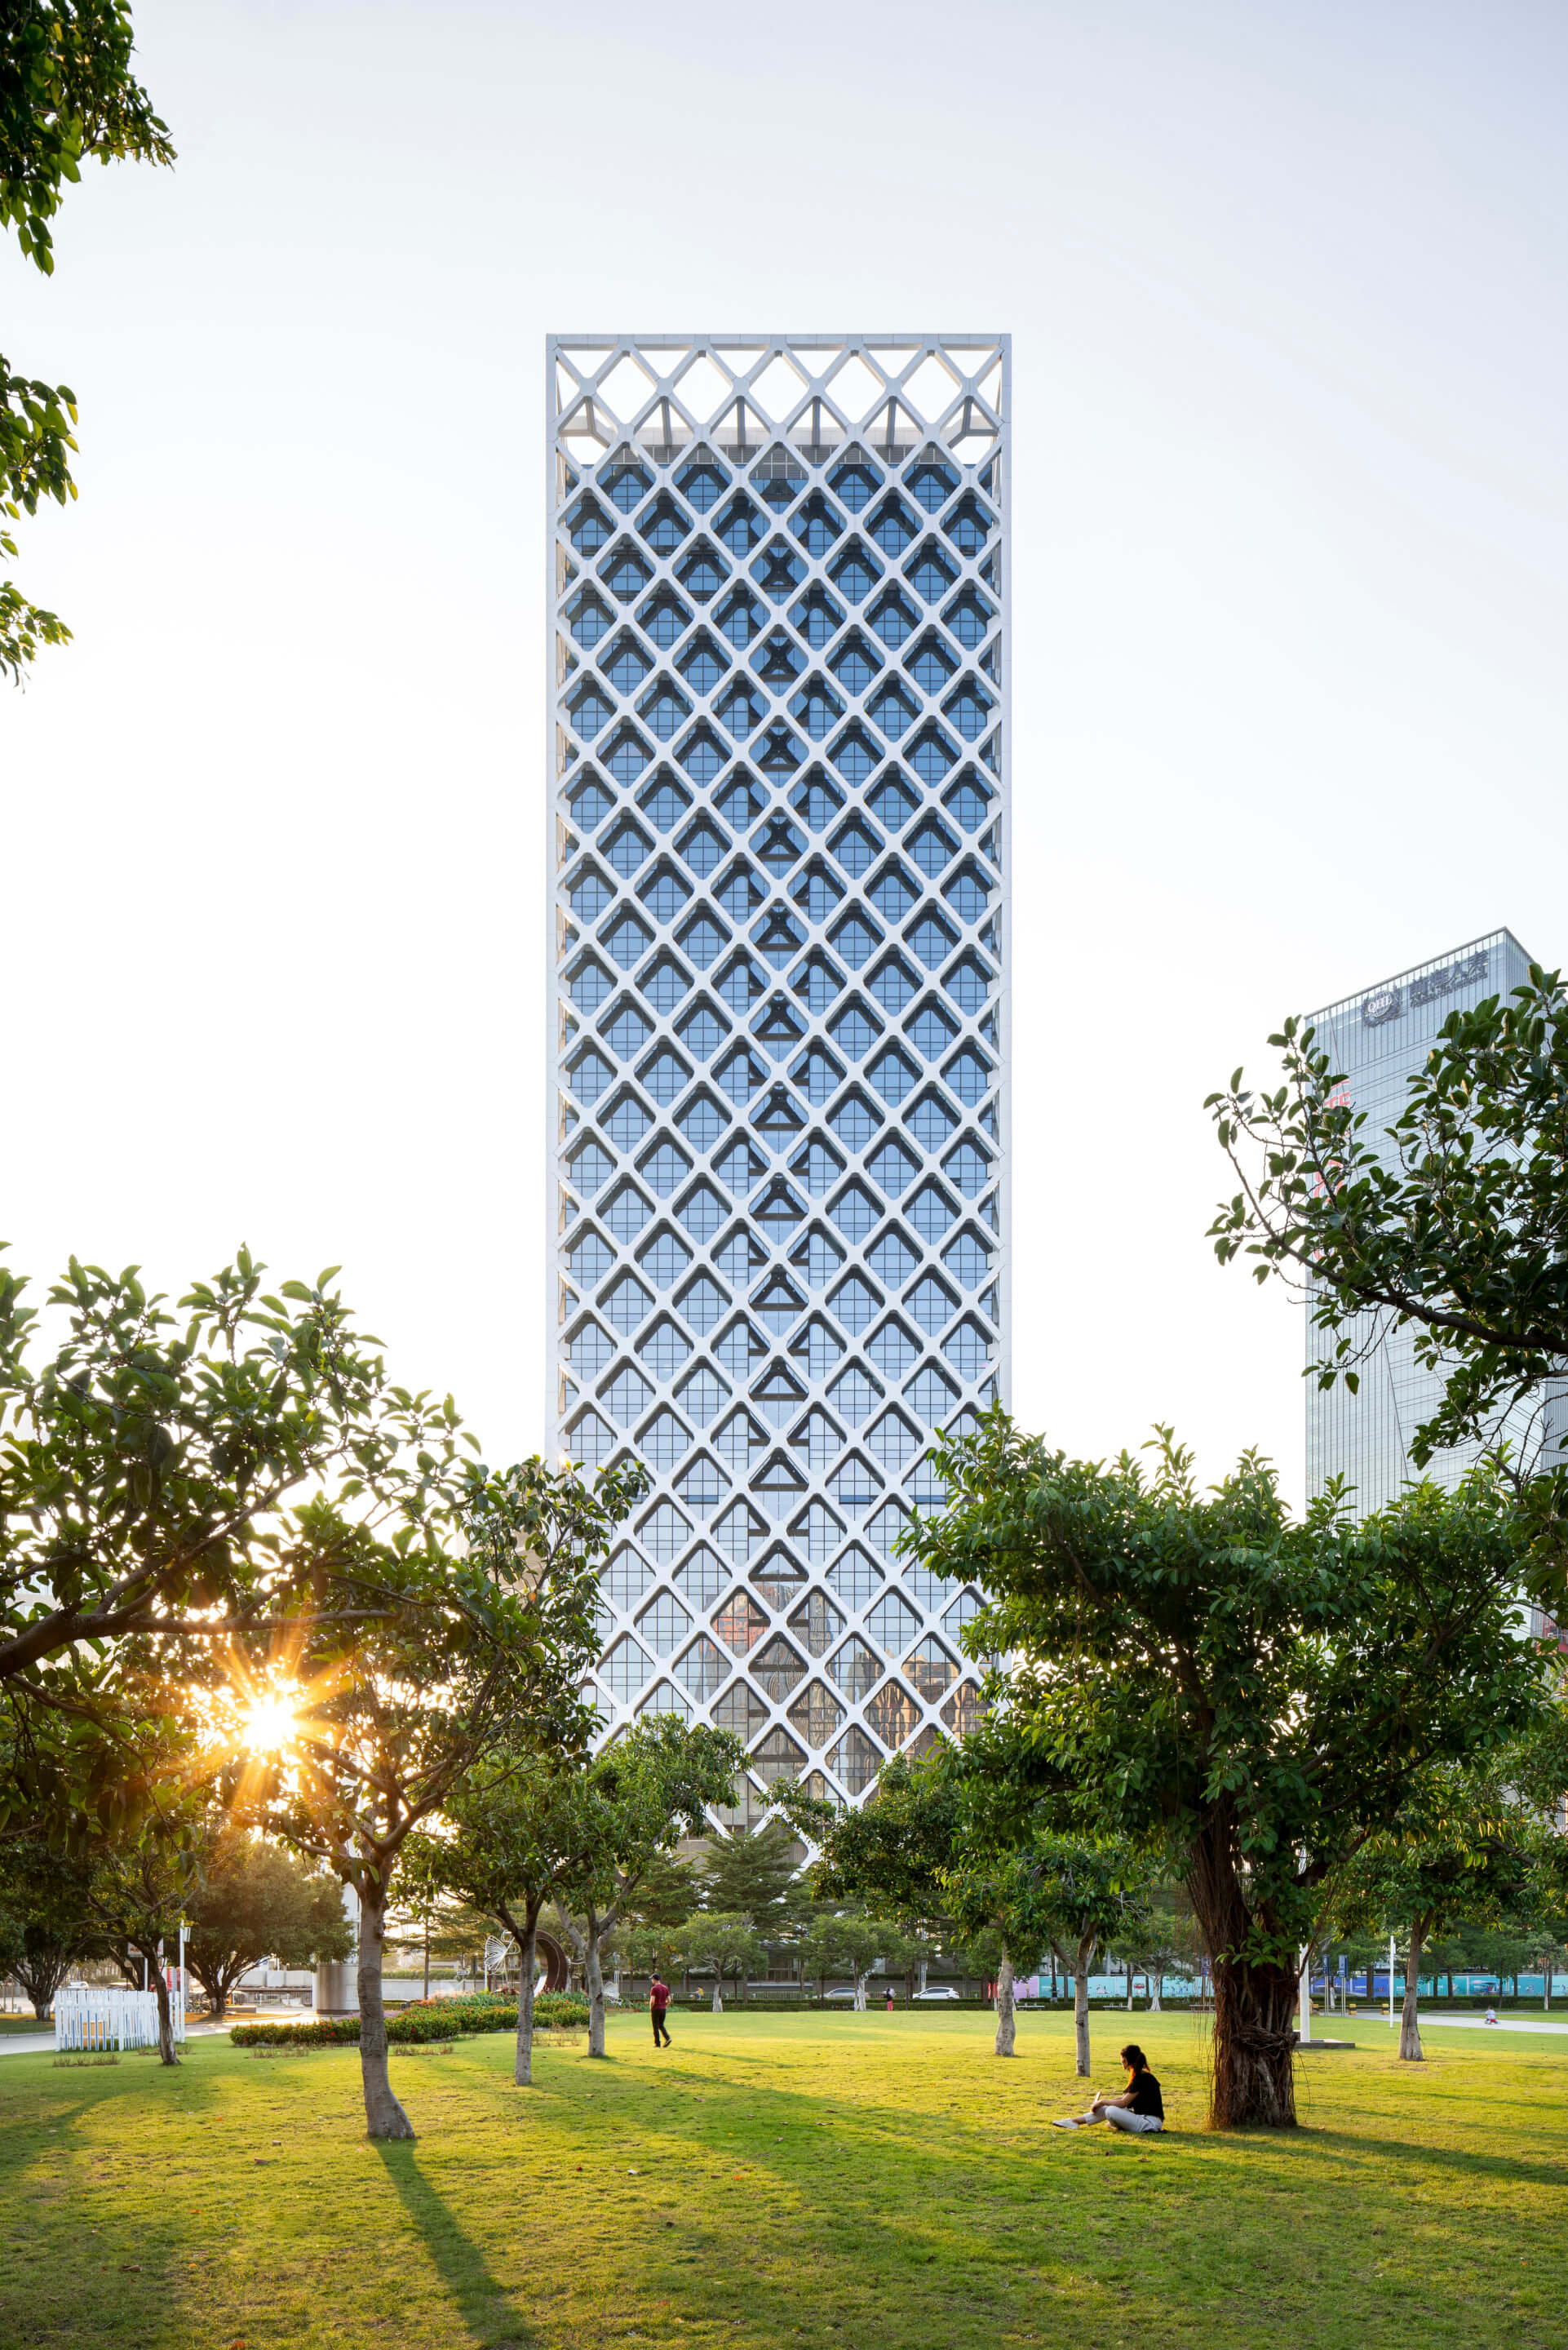 A glass tower wrapped in a diamond superstructure